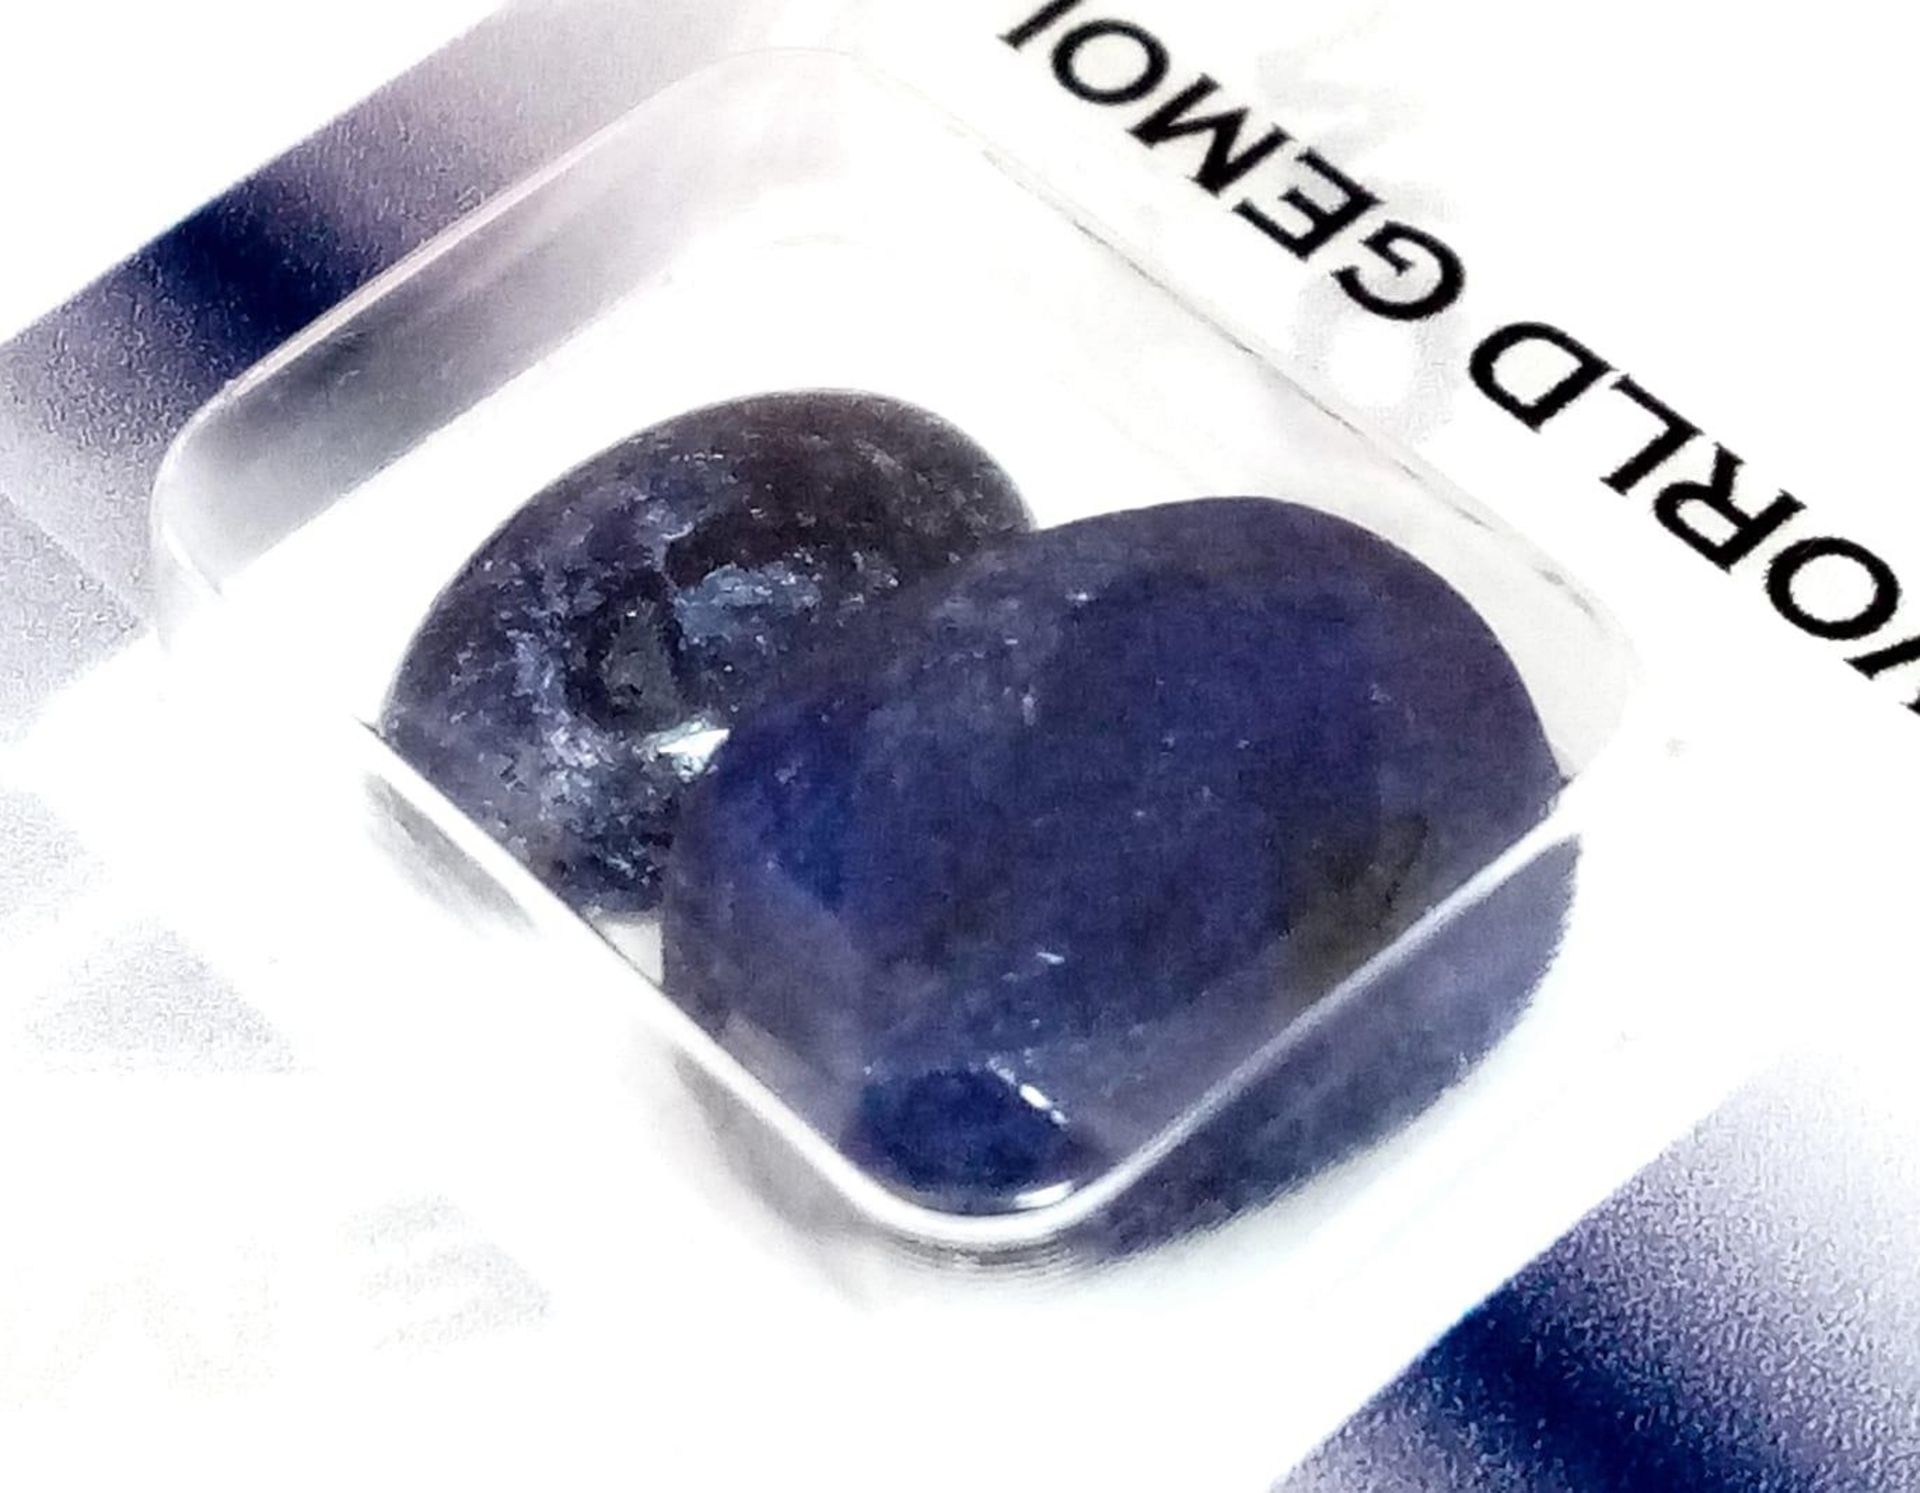 17.77ct of Natural Corundum. Two pieces - oval cut. Comes with a WGI certificate.